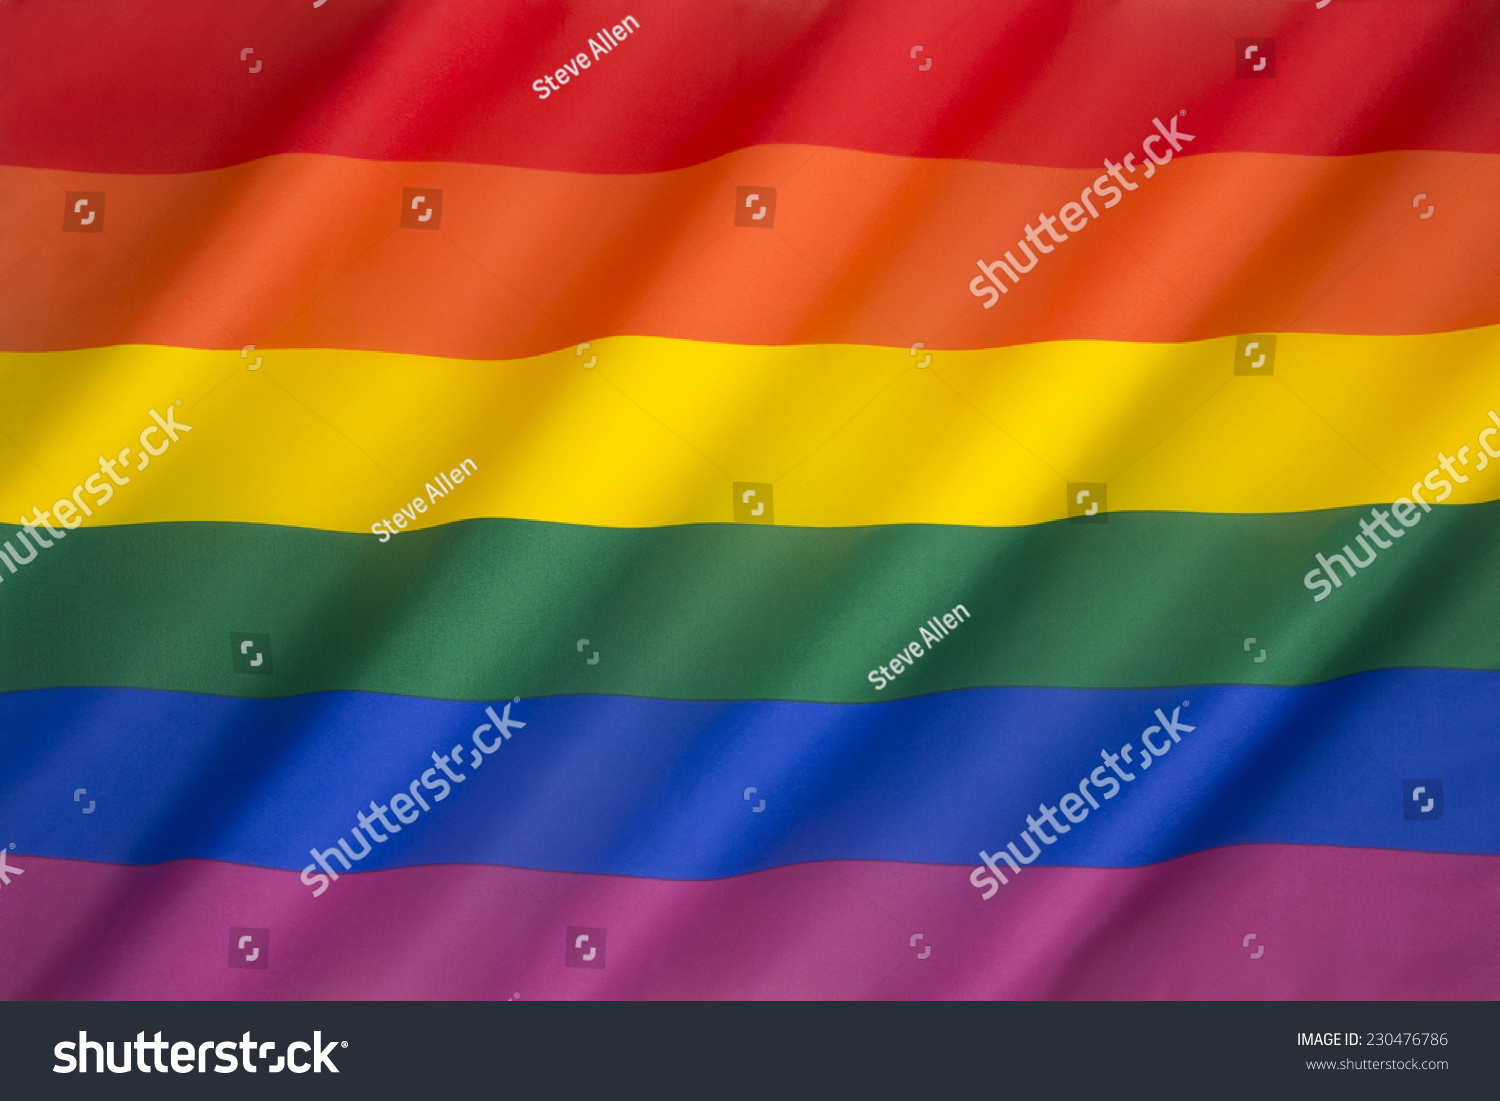 The Rainbow Flag, Commonly The Gay Pride Flag And Sometimes The Lgbt ...